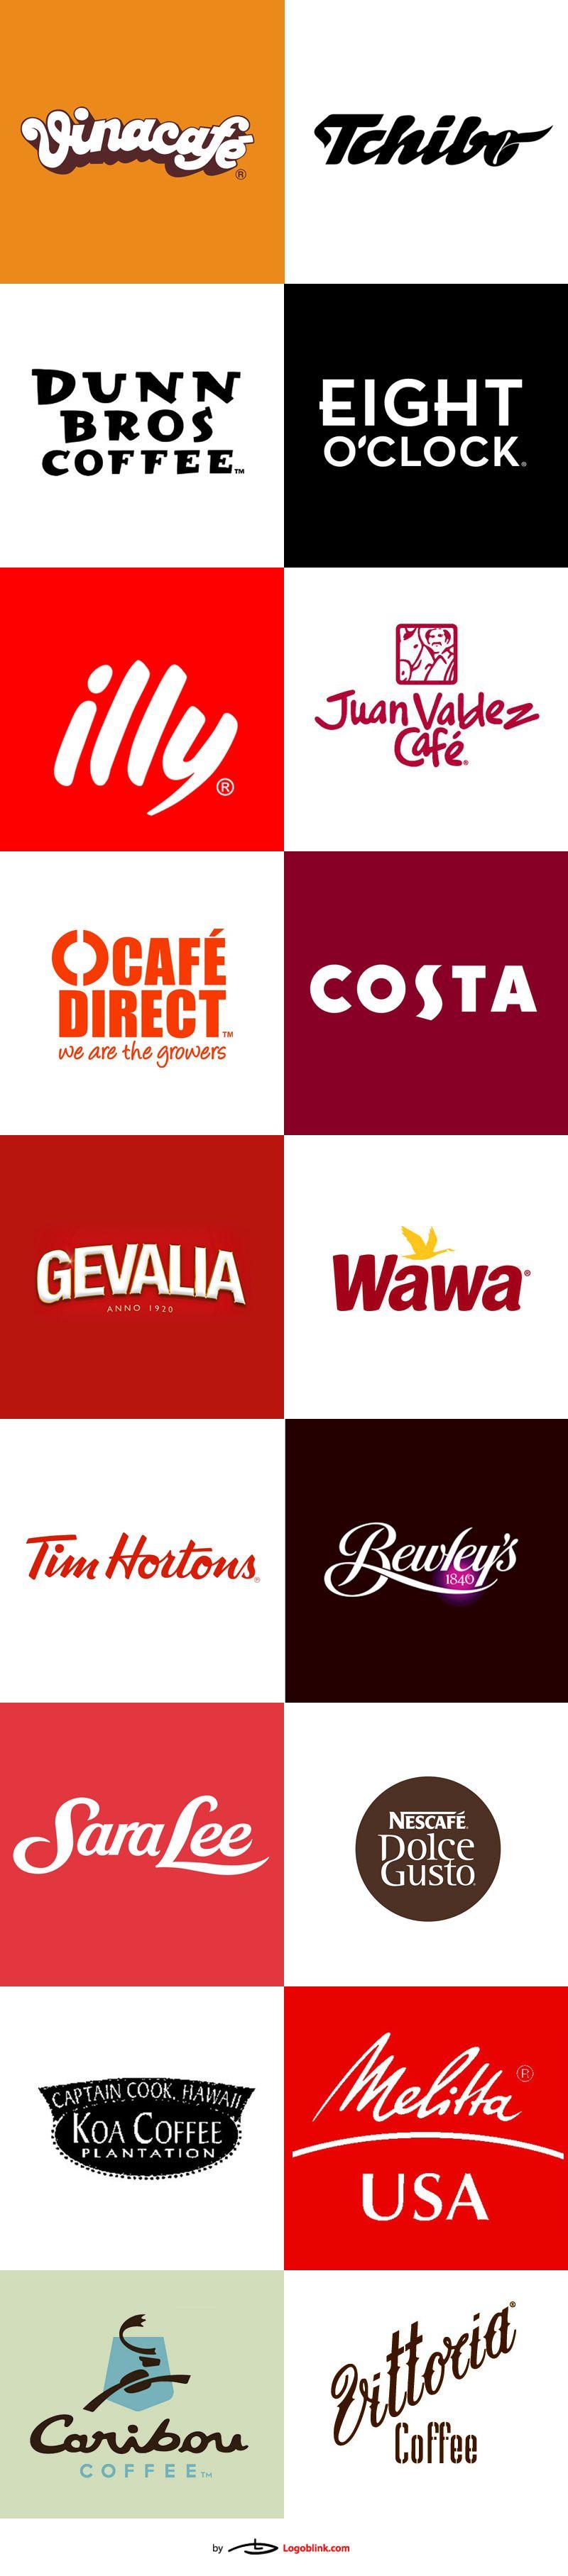 Famous Coffee Logo - 36 Famous coffee logos from around the world. | Design | Coffee logo ...